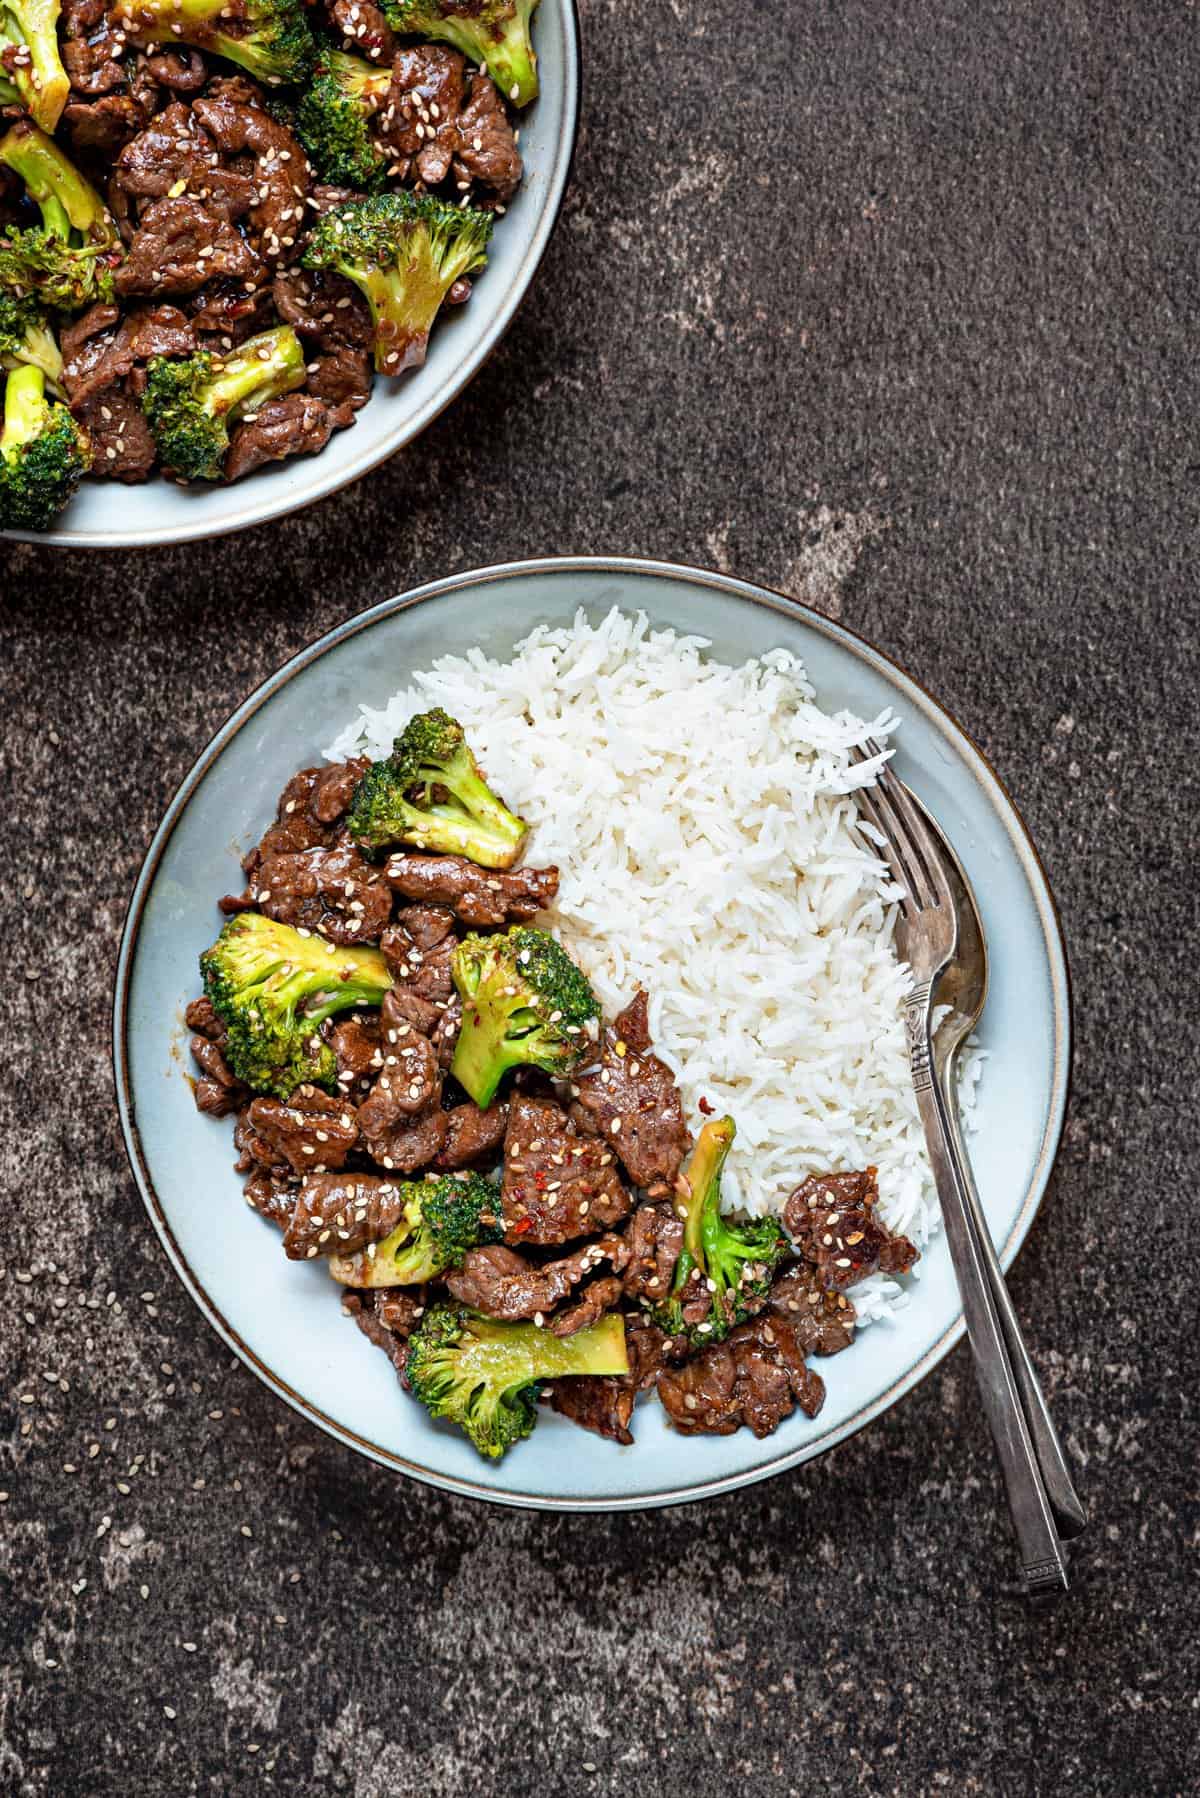 broccoli beef served in a gray bowl with a side of white rice, topped with sesame seeds and red chili flakes.